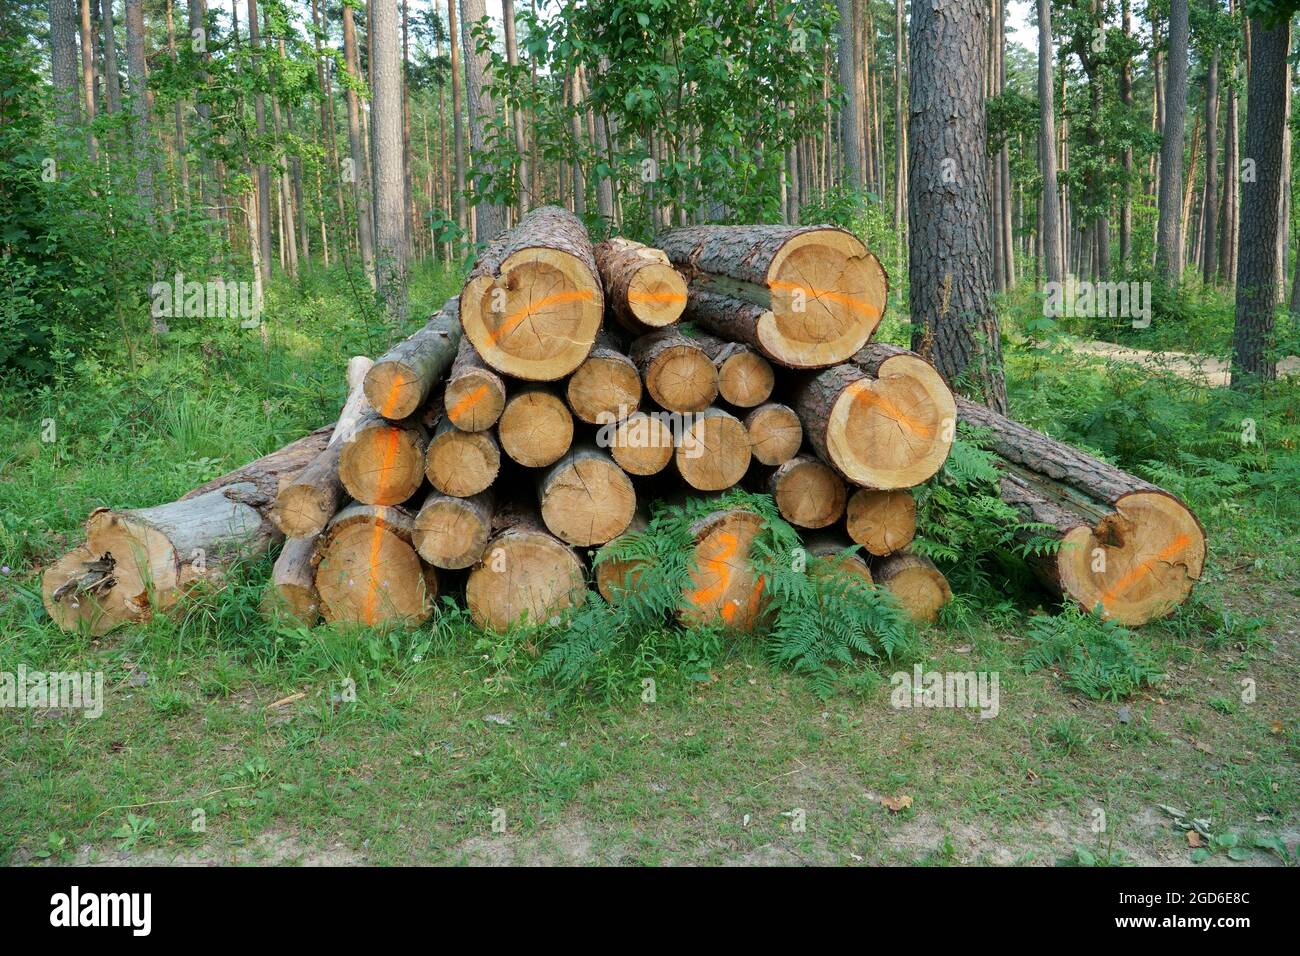 View of logs stacked after deforestation. Cross-sectional view of felled pine trunks. Logging scene in a wooded environment. A static landscape with c Stock Photo